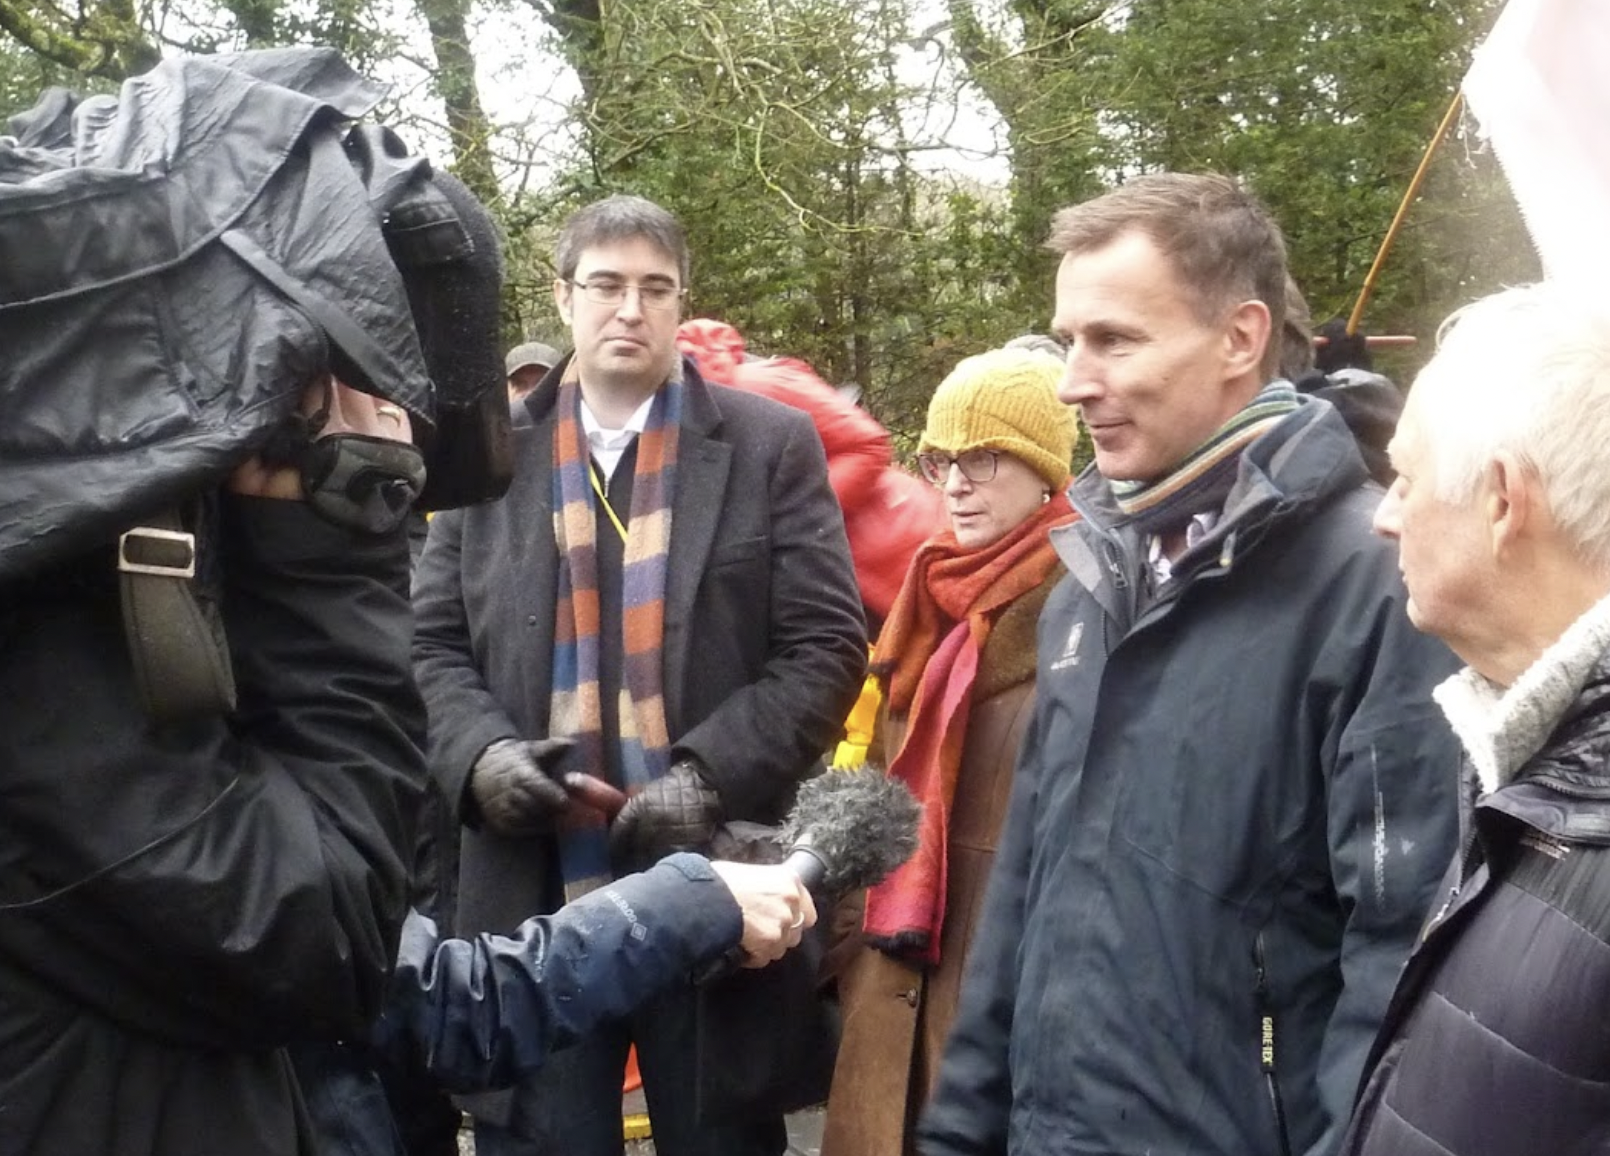 Jeremy Hunt MP condemns decision to allow drilling